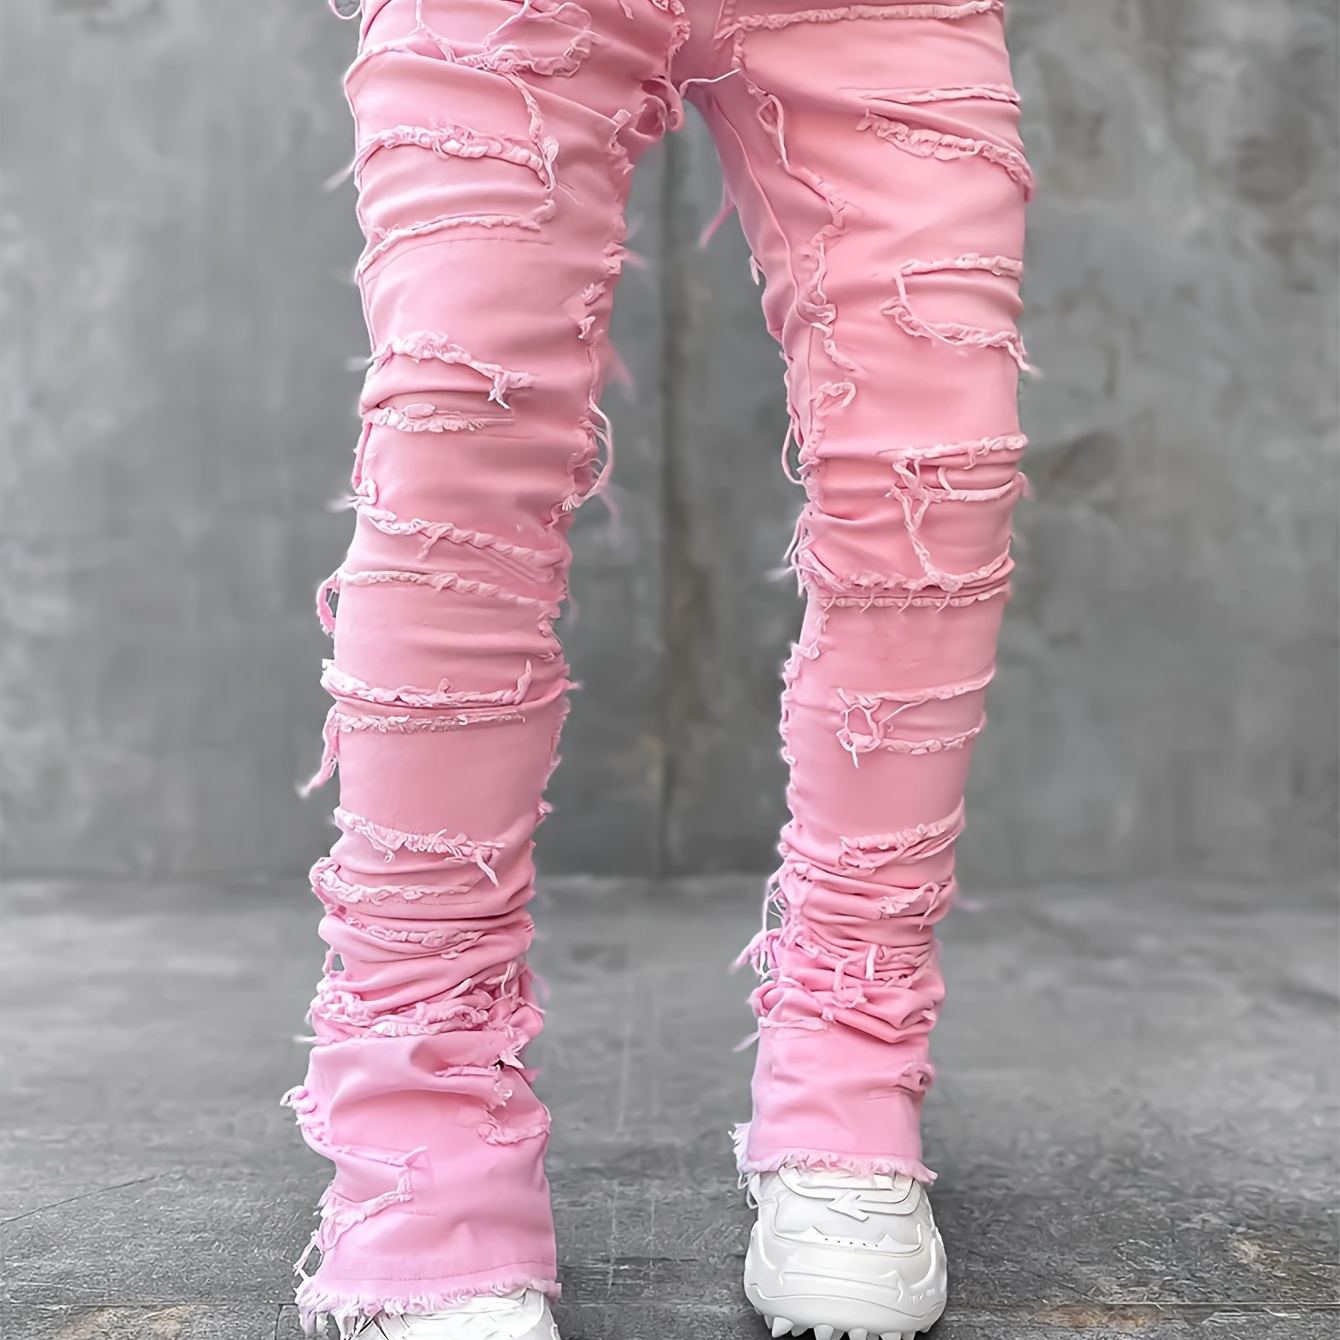 

Women's Creative Tassel Decorated Straight Jeans, Men's And Women's Casual Elastic Street Style Hip-hop Skateboard Rap Jeans For All Seasons